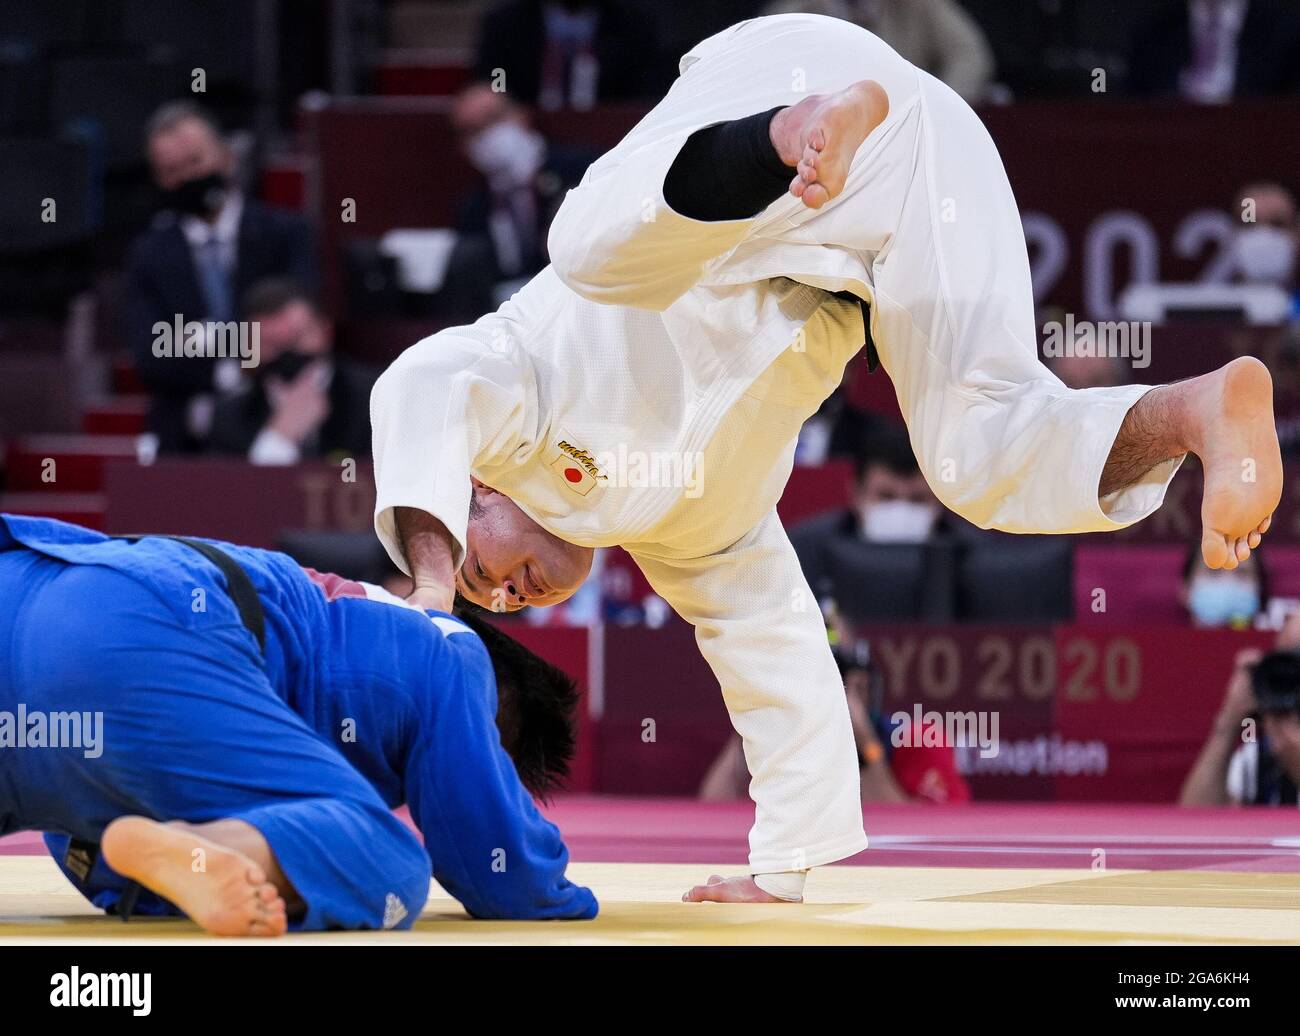 Tokyo, Japan. 29th July, 2021. Aaron Wolf (R) of Japan competes with Cho Guham of South Korea during their men's -100kg final match of judo at Tokyo 2020 Olympic Games in Tokyo, Japan, July 29, 2021. Credit: Liu Dawei/Xinhua/Alamy Live News Stock Photo